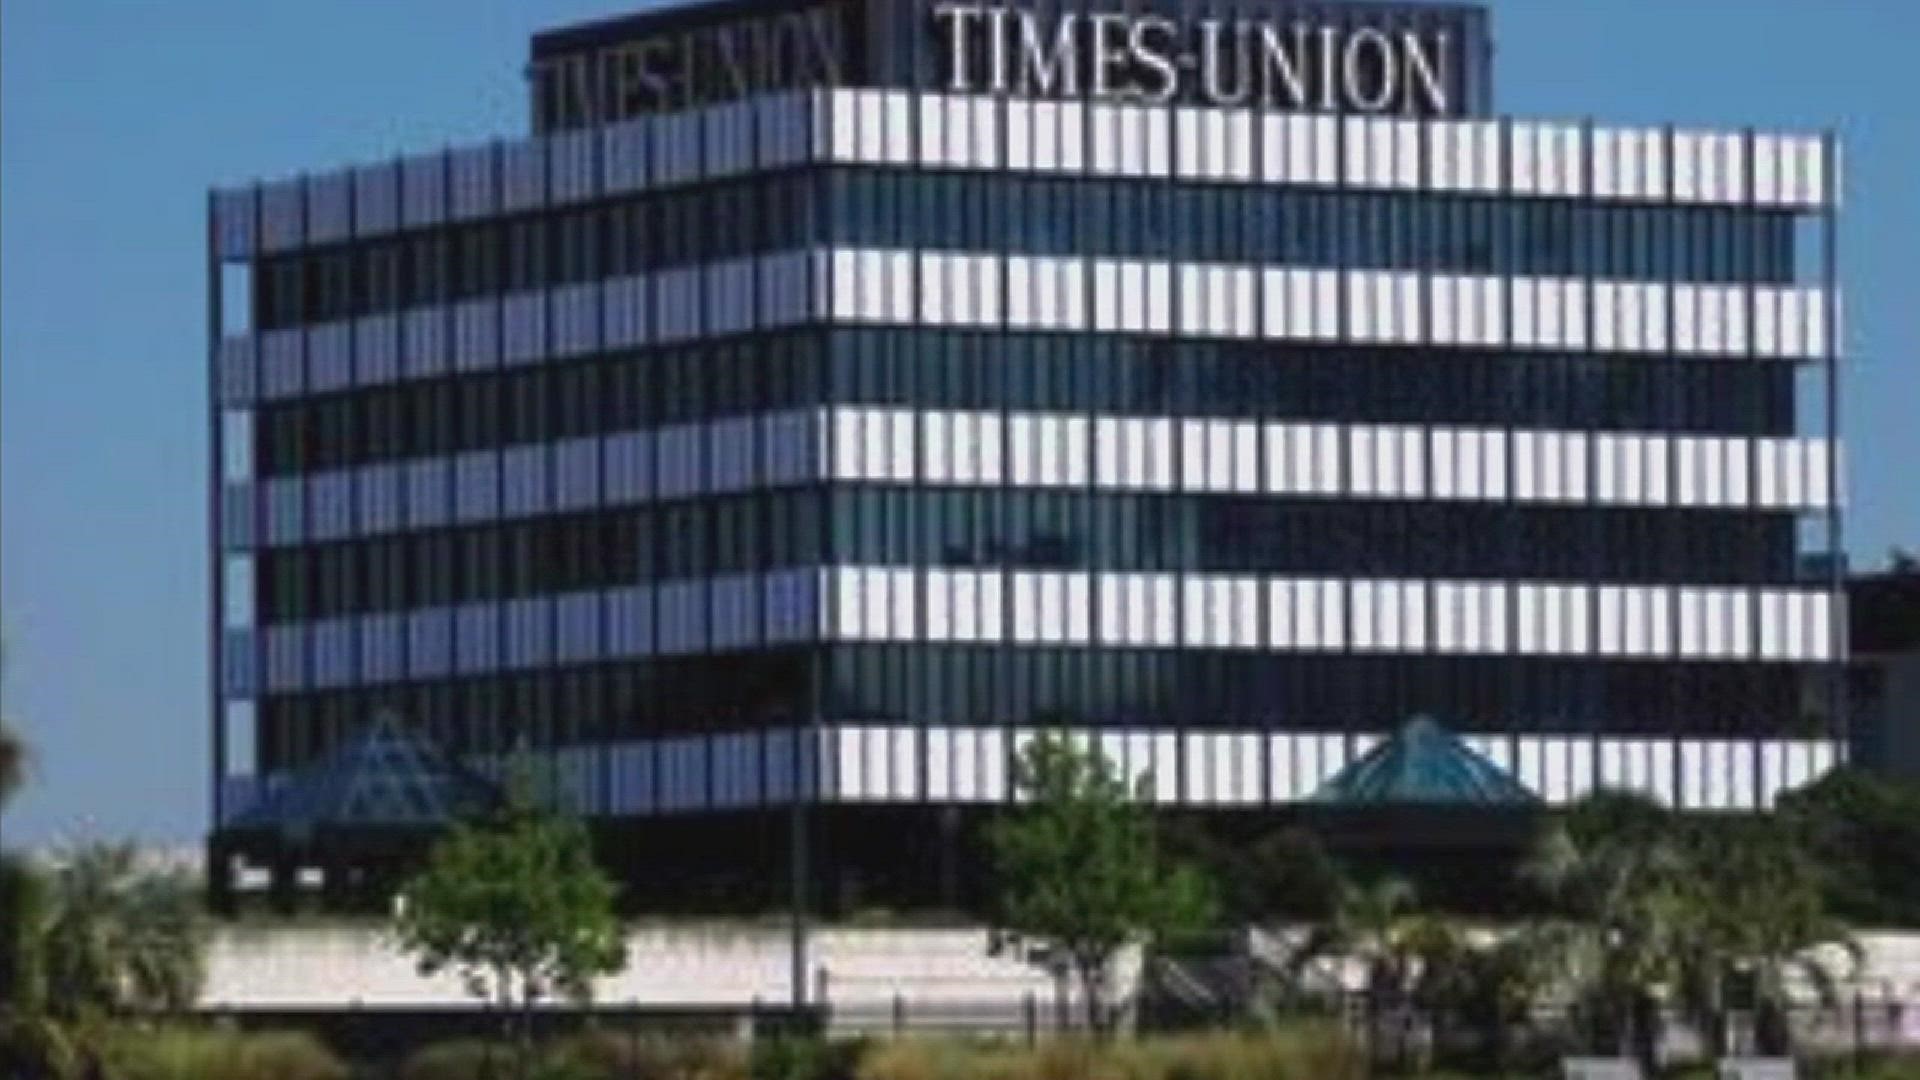 Bare Bones | Here's what the former Florida Times-Union building in Jacksonville looks like now